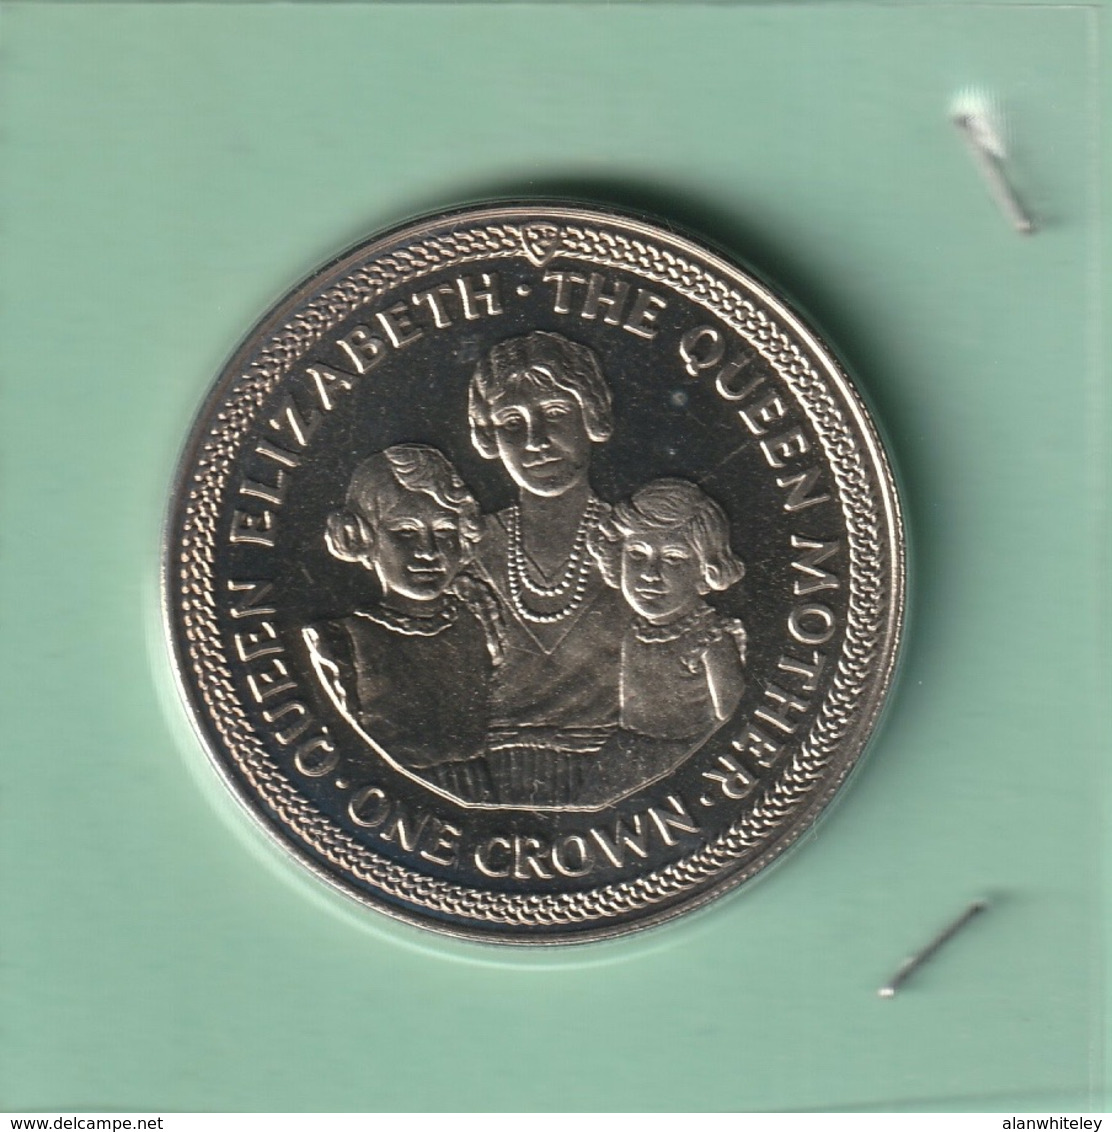 ISLE OF MAN 1990 Queen Mother's 90th Birthday Crown: Single Coin UNCIRCULATED - Isle Of Man